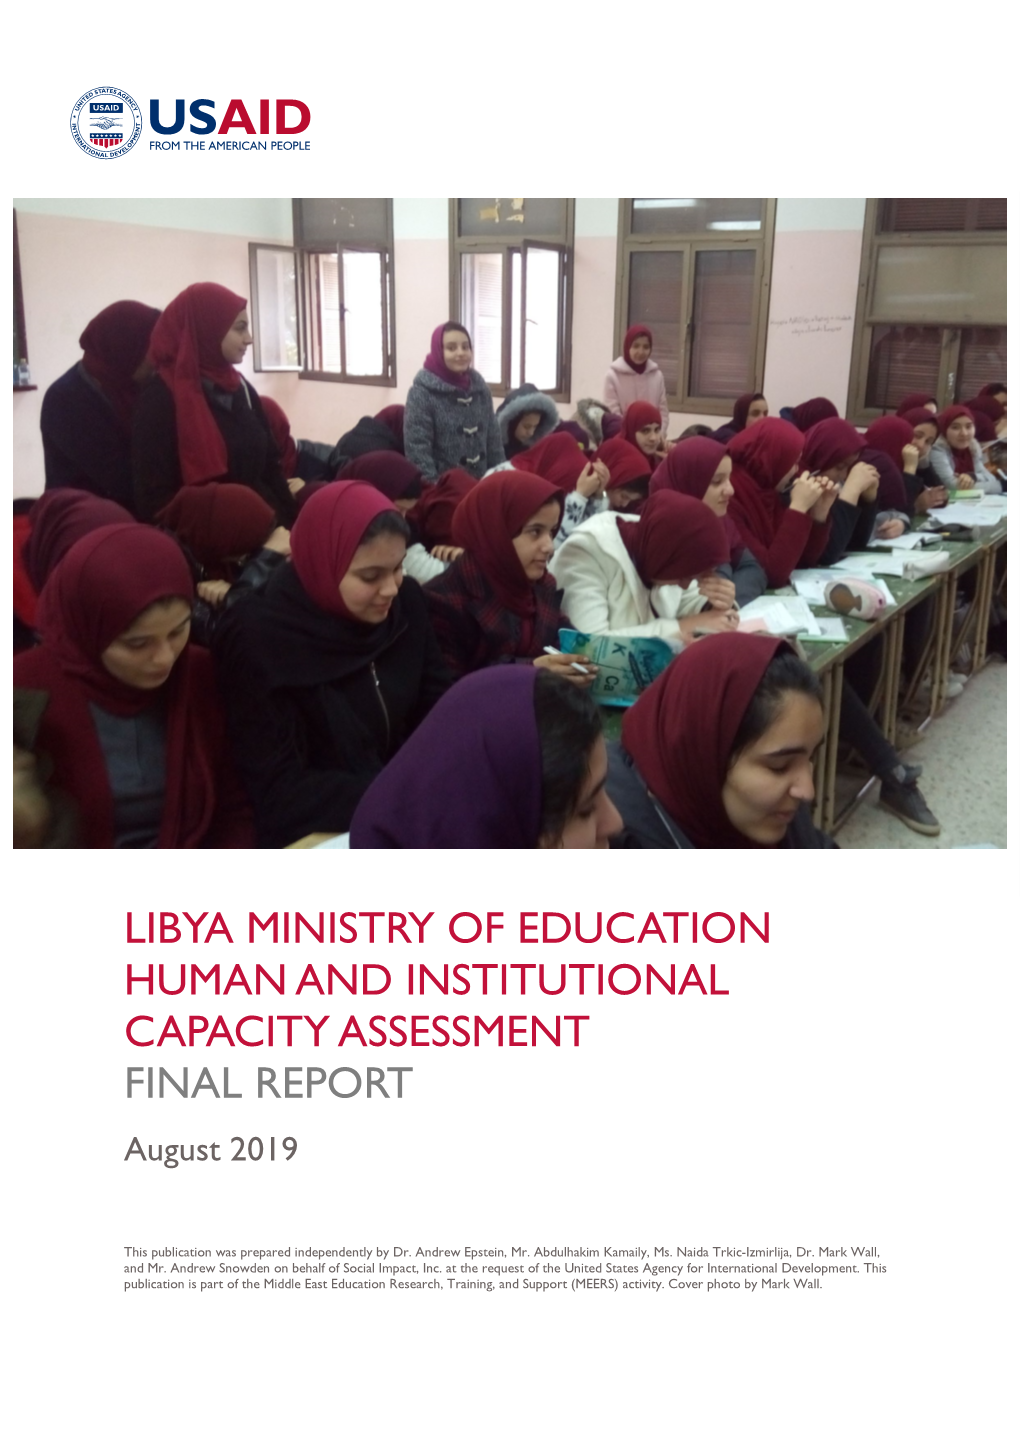 LIBYA MINISTRY of EDUCATION HUMAN and INSTITUTIONAL CAPACITY ASSESSMENT FINAL REPORT August 2019